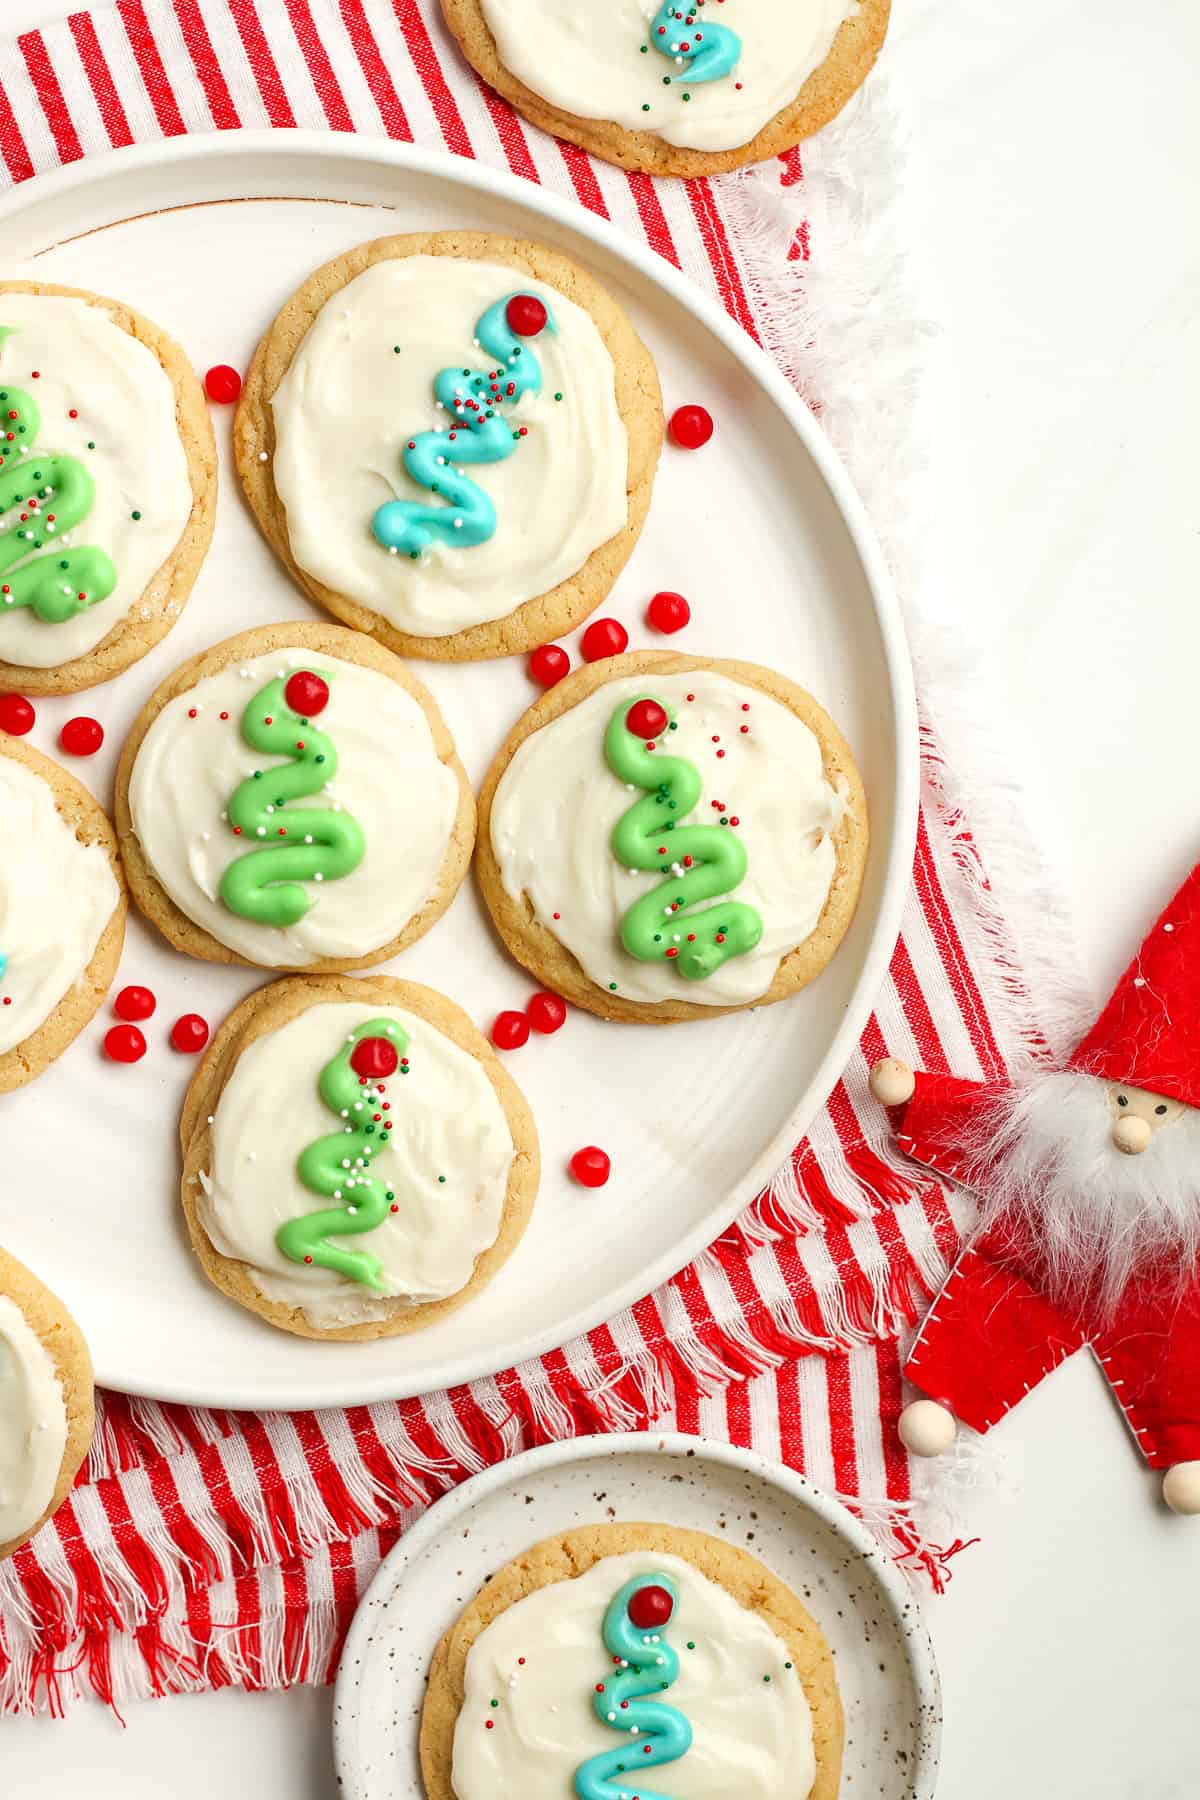 A partial plate of frosted sugar cookies with mini Christmas trees.